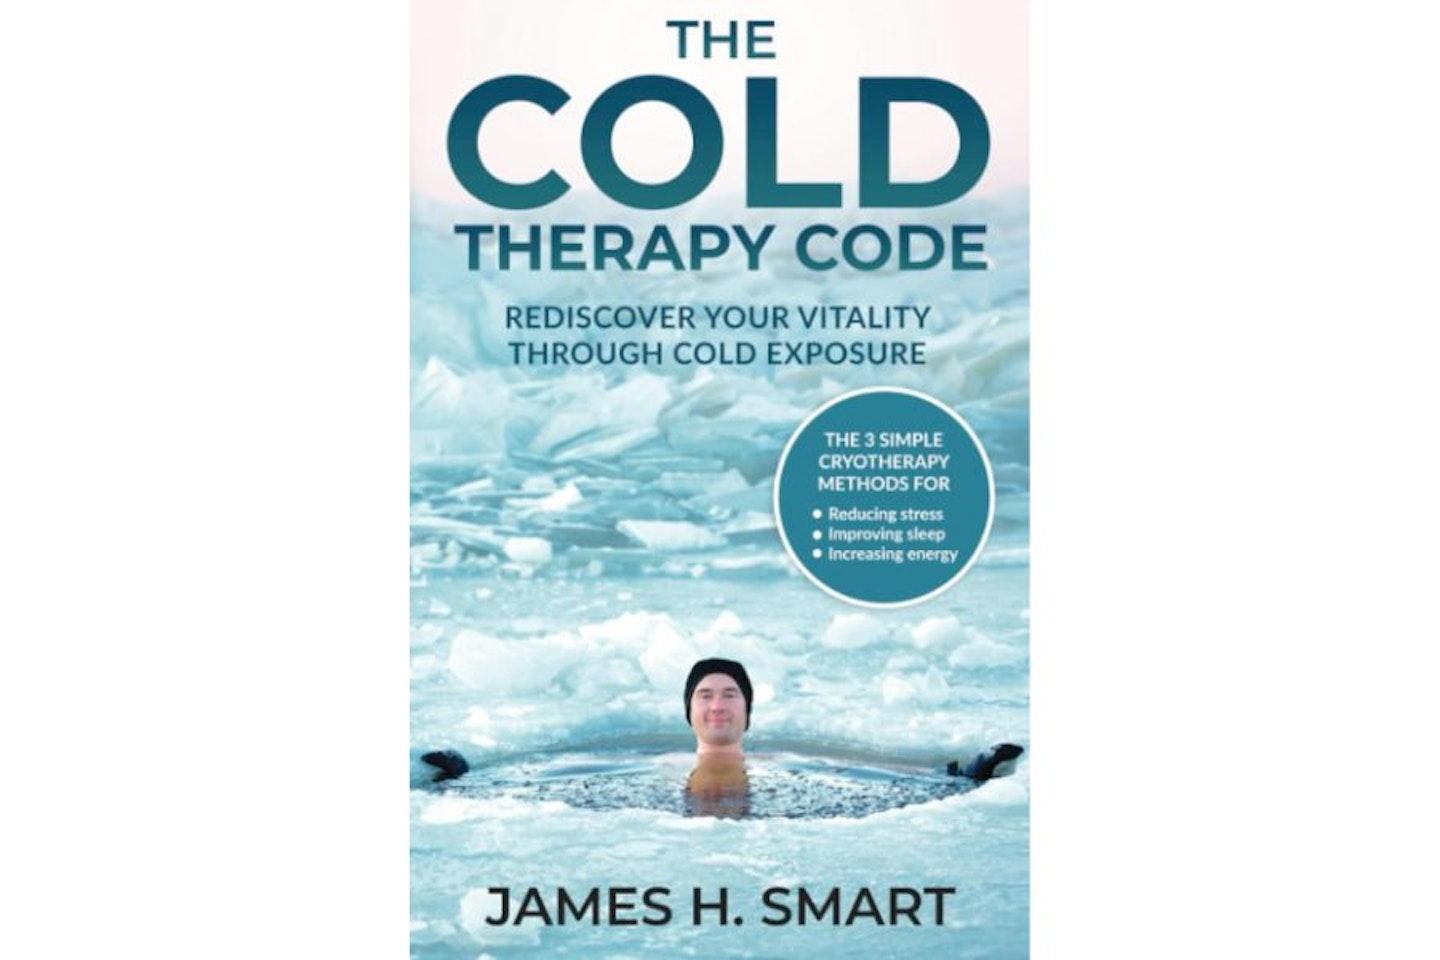 The Cold Therapy Code: Rediscover Your Vitality Through Cold Exposure